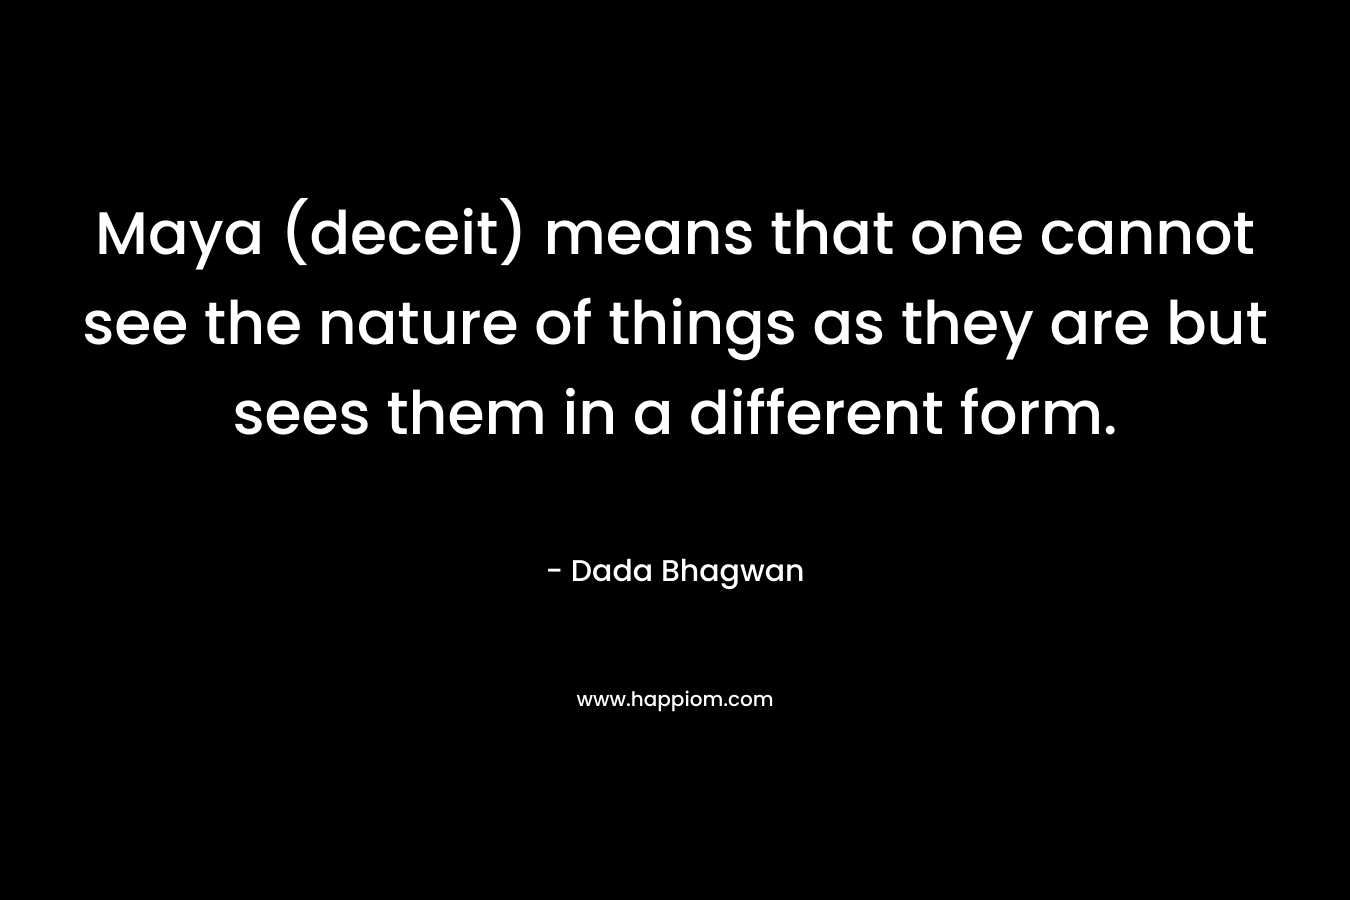 Maya (deceit) means that one cannot see the nature of things as they are but sees them in a different form. – Dada Bhagwan